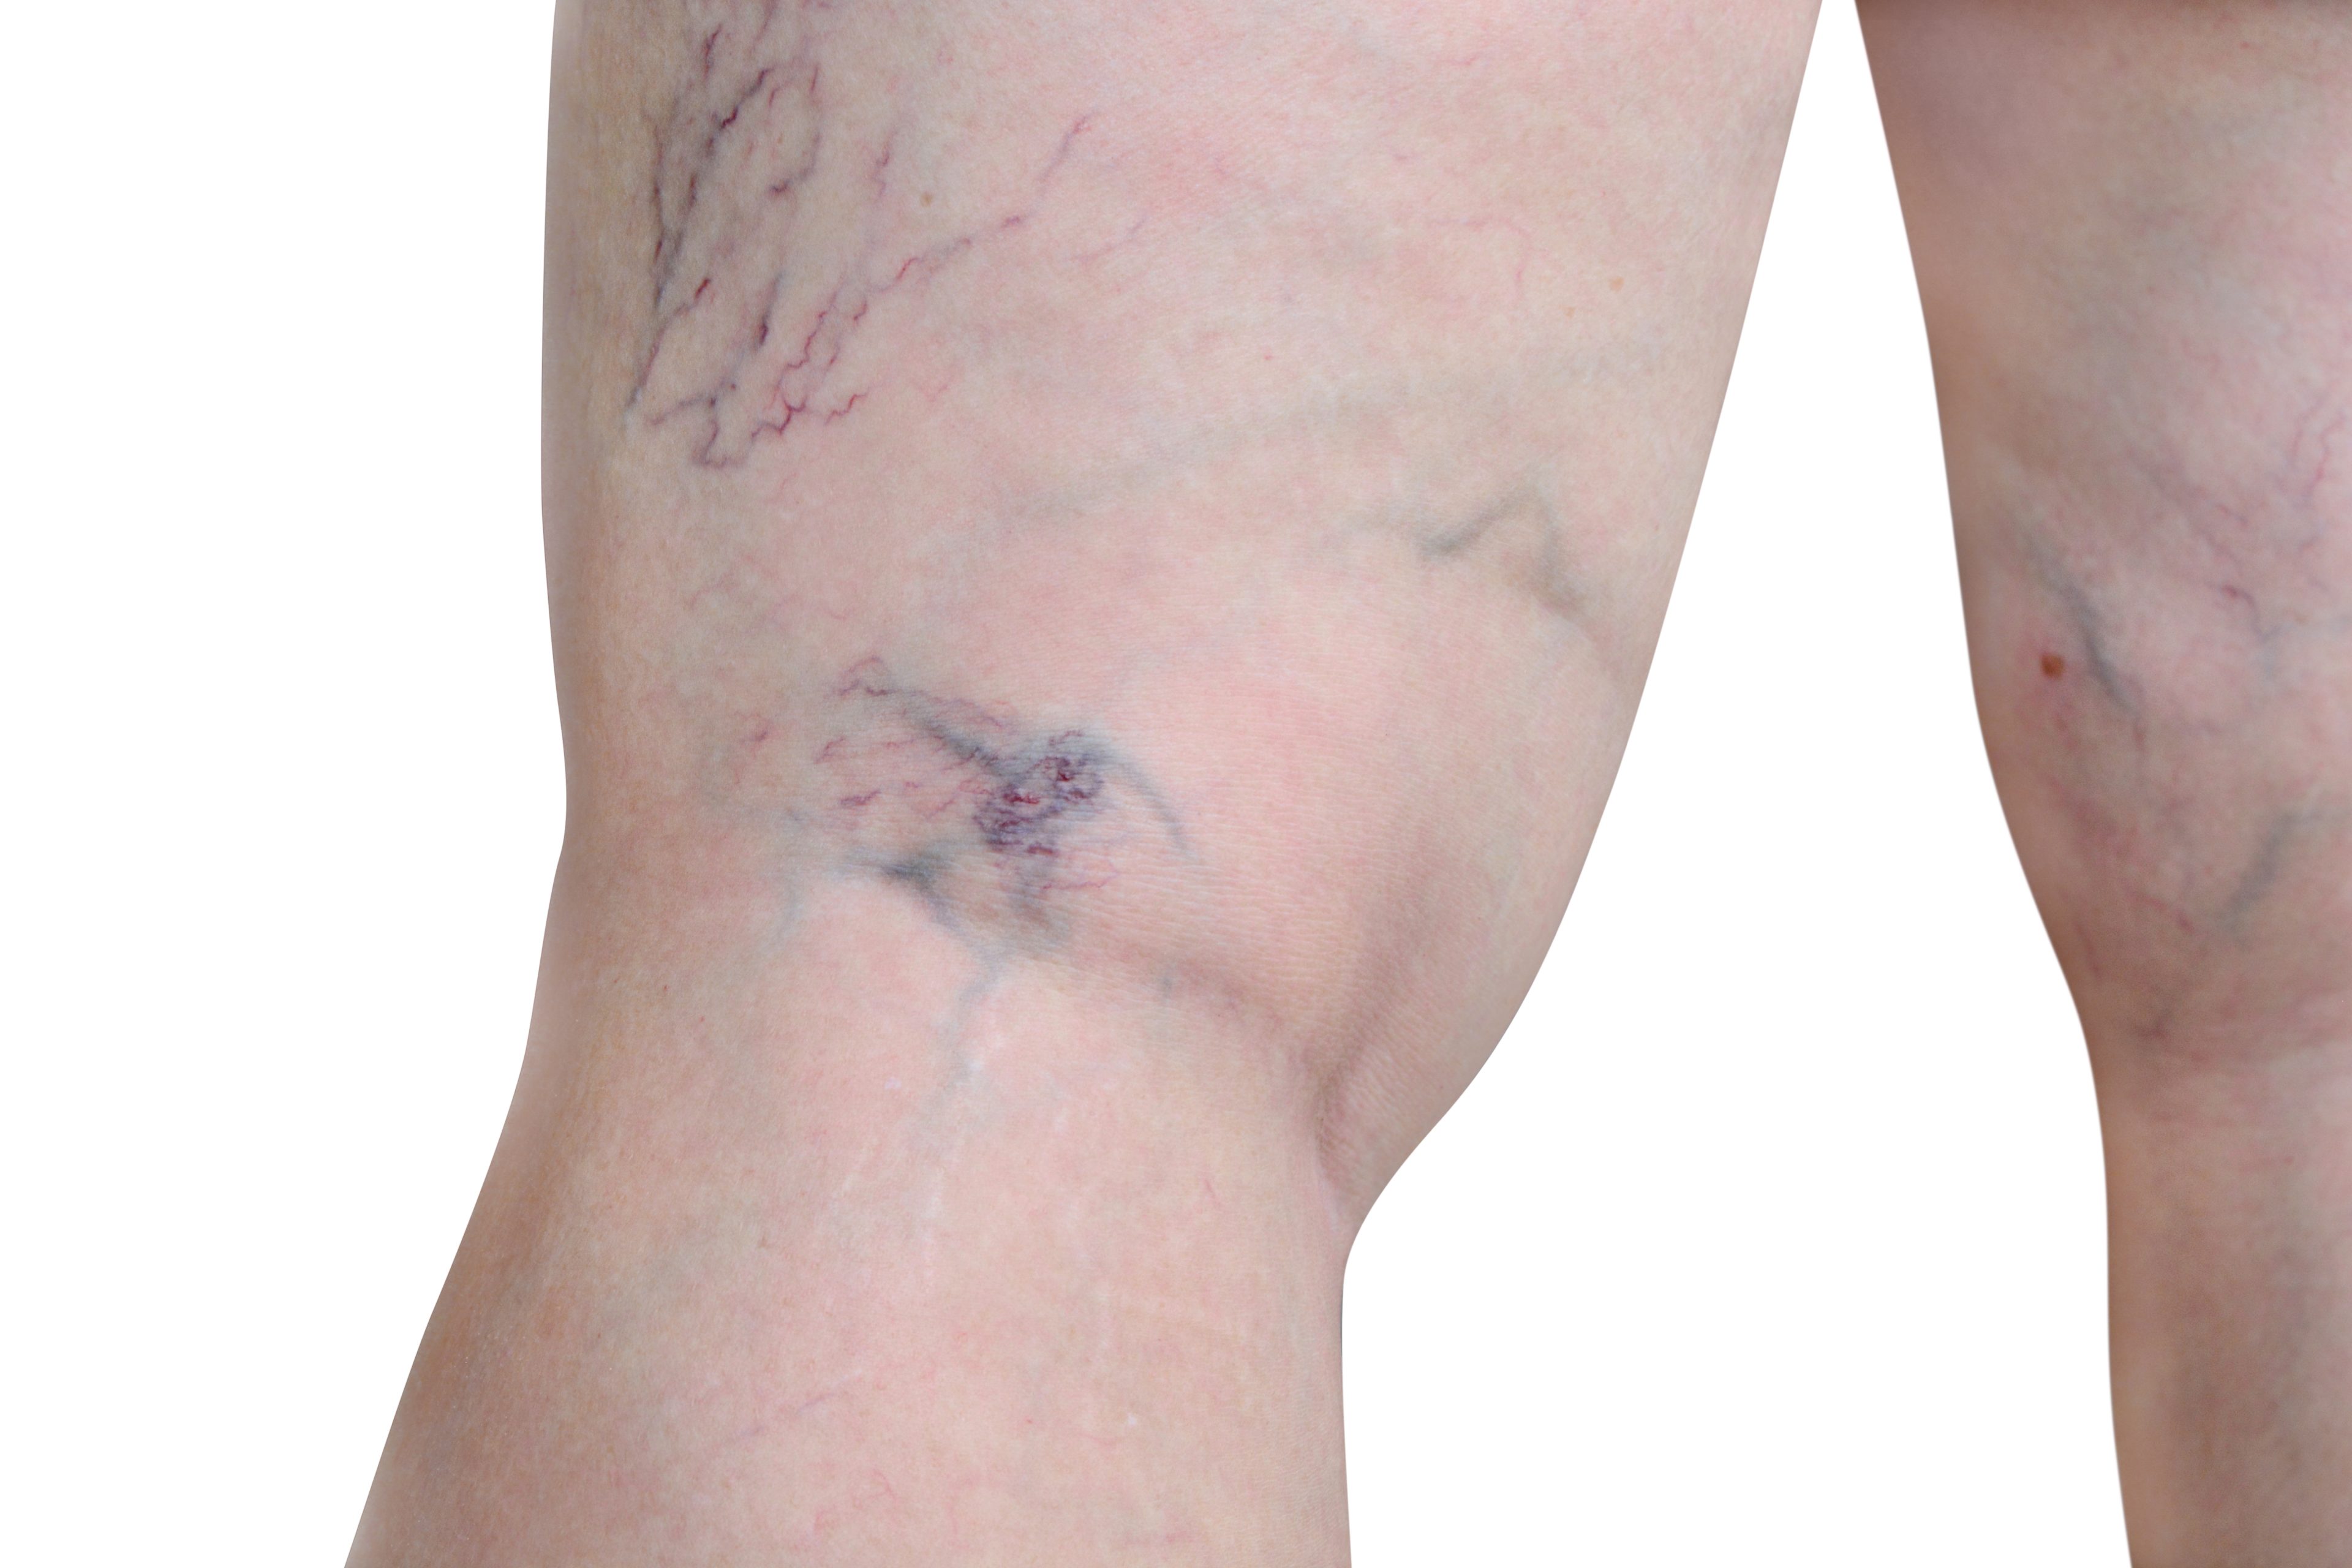 image of venous insufficiency on person's knee